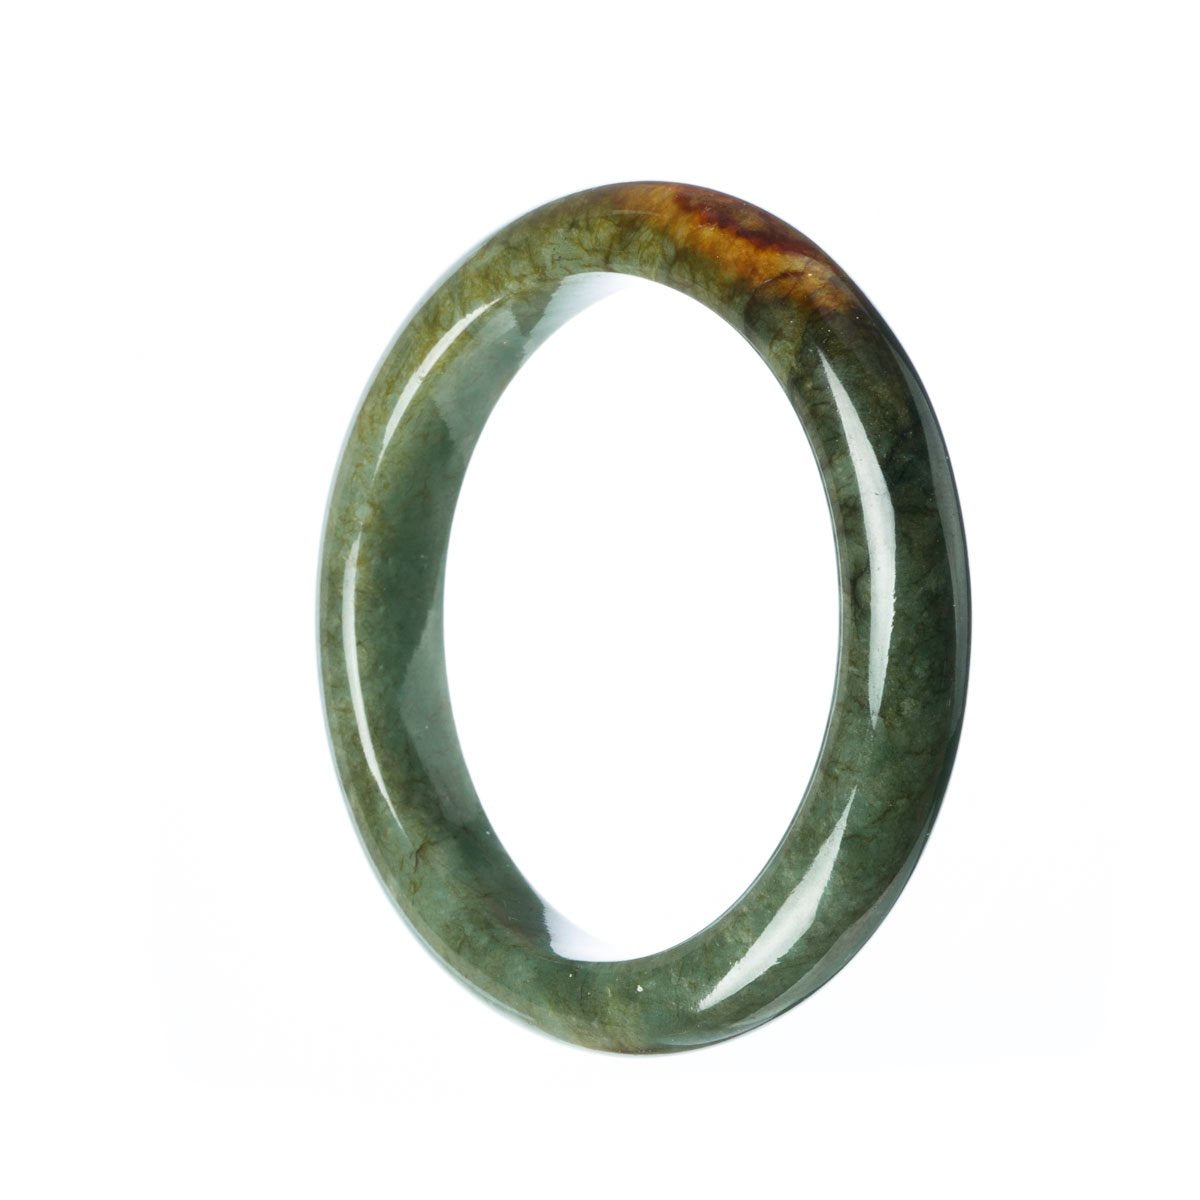 A dark green traditional jade bangle bracelet with a semi-round shape, measuring 56mm. Made from authentic untreated jade.